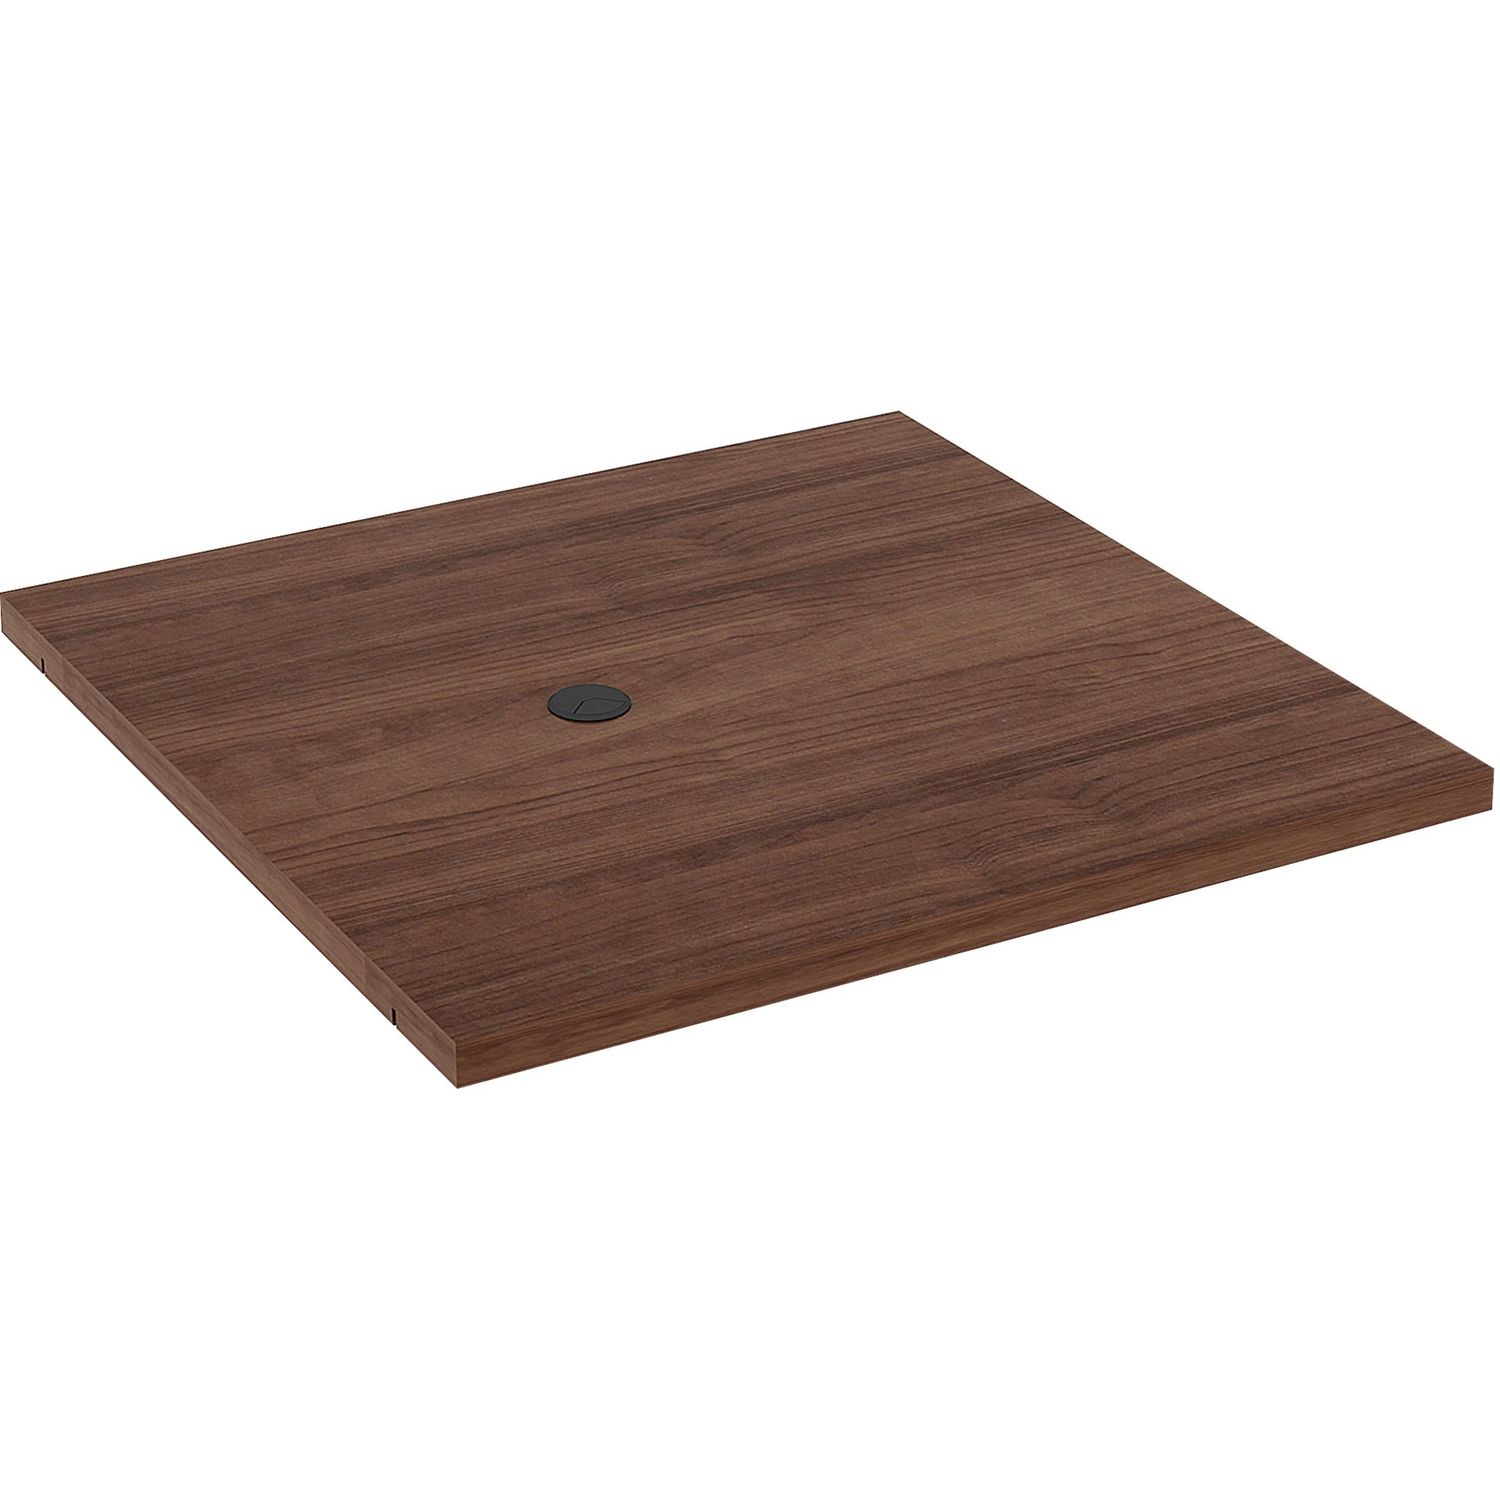 Prominence Conference Table Top Walnut Square, Mahogany, High Pressure Laminate (HPL) Top x 48" Table Top Width x 48" Table Top Depth x 2" Table Top Thickness, Assembly Required